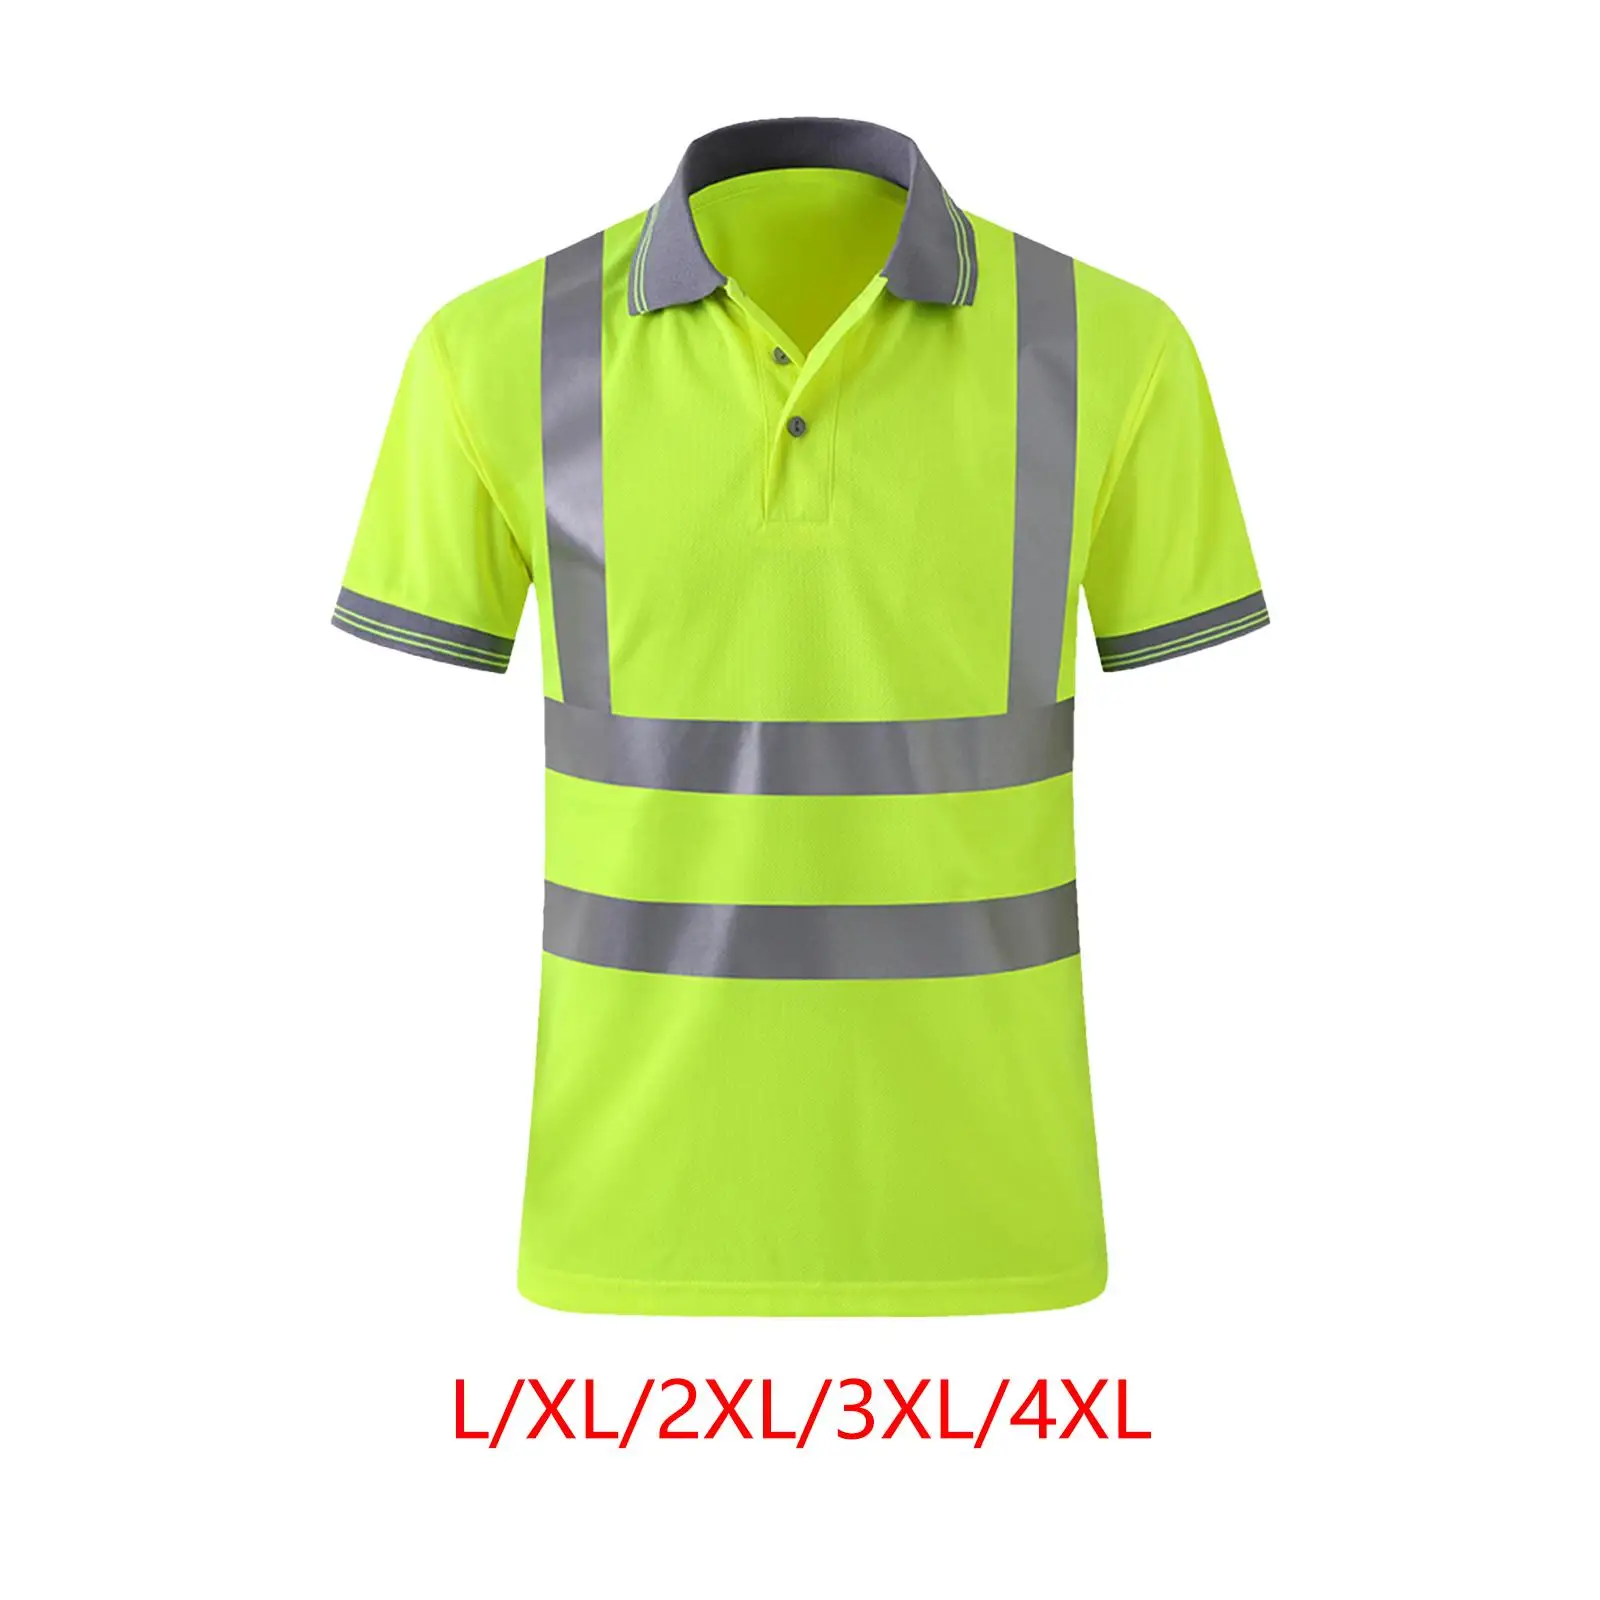 Reflective Construction Shirts Quick Dry Lightweight Safety Workwear Work Wear Shirts for Night Work Warehouse Road Women Adults